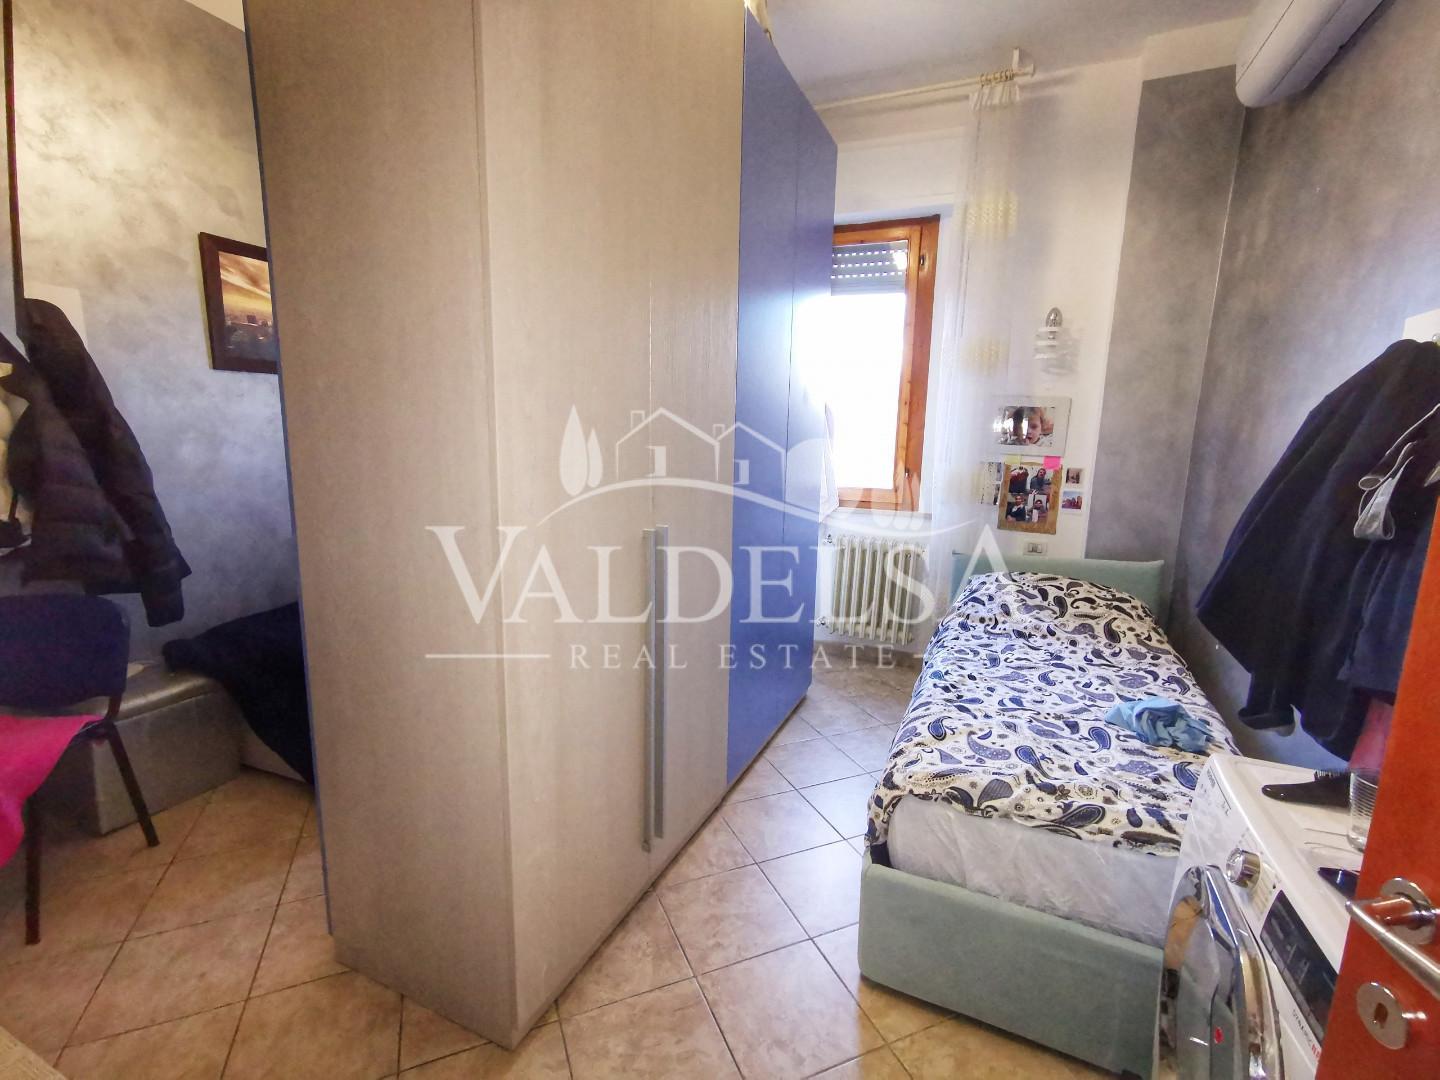 Apartment for sale, ref. 711